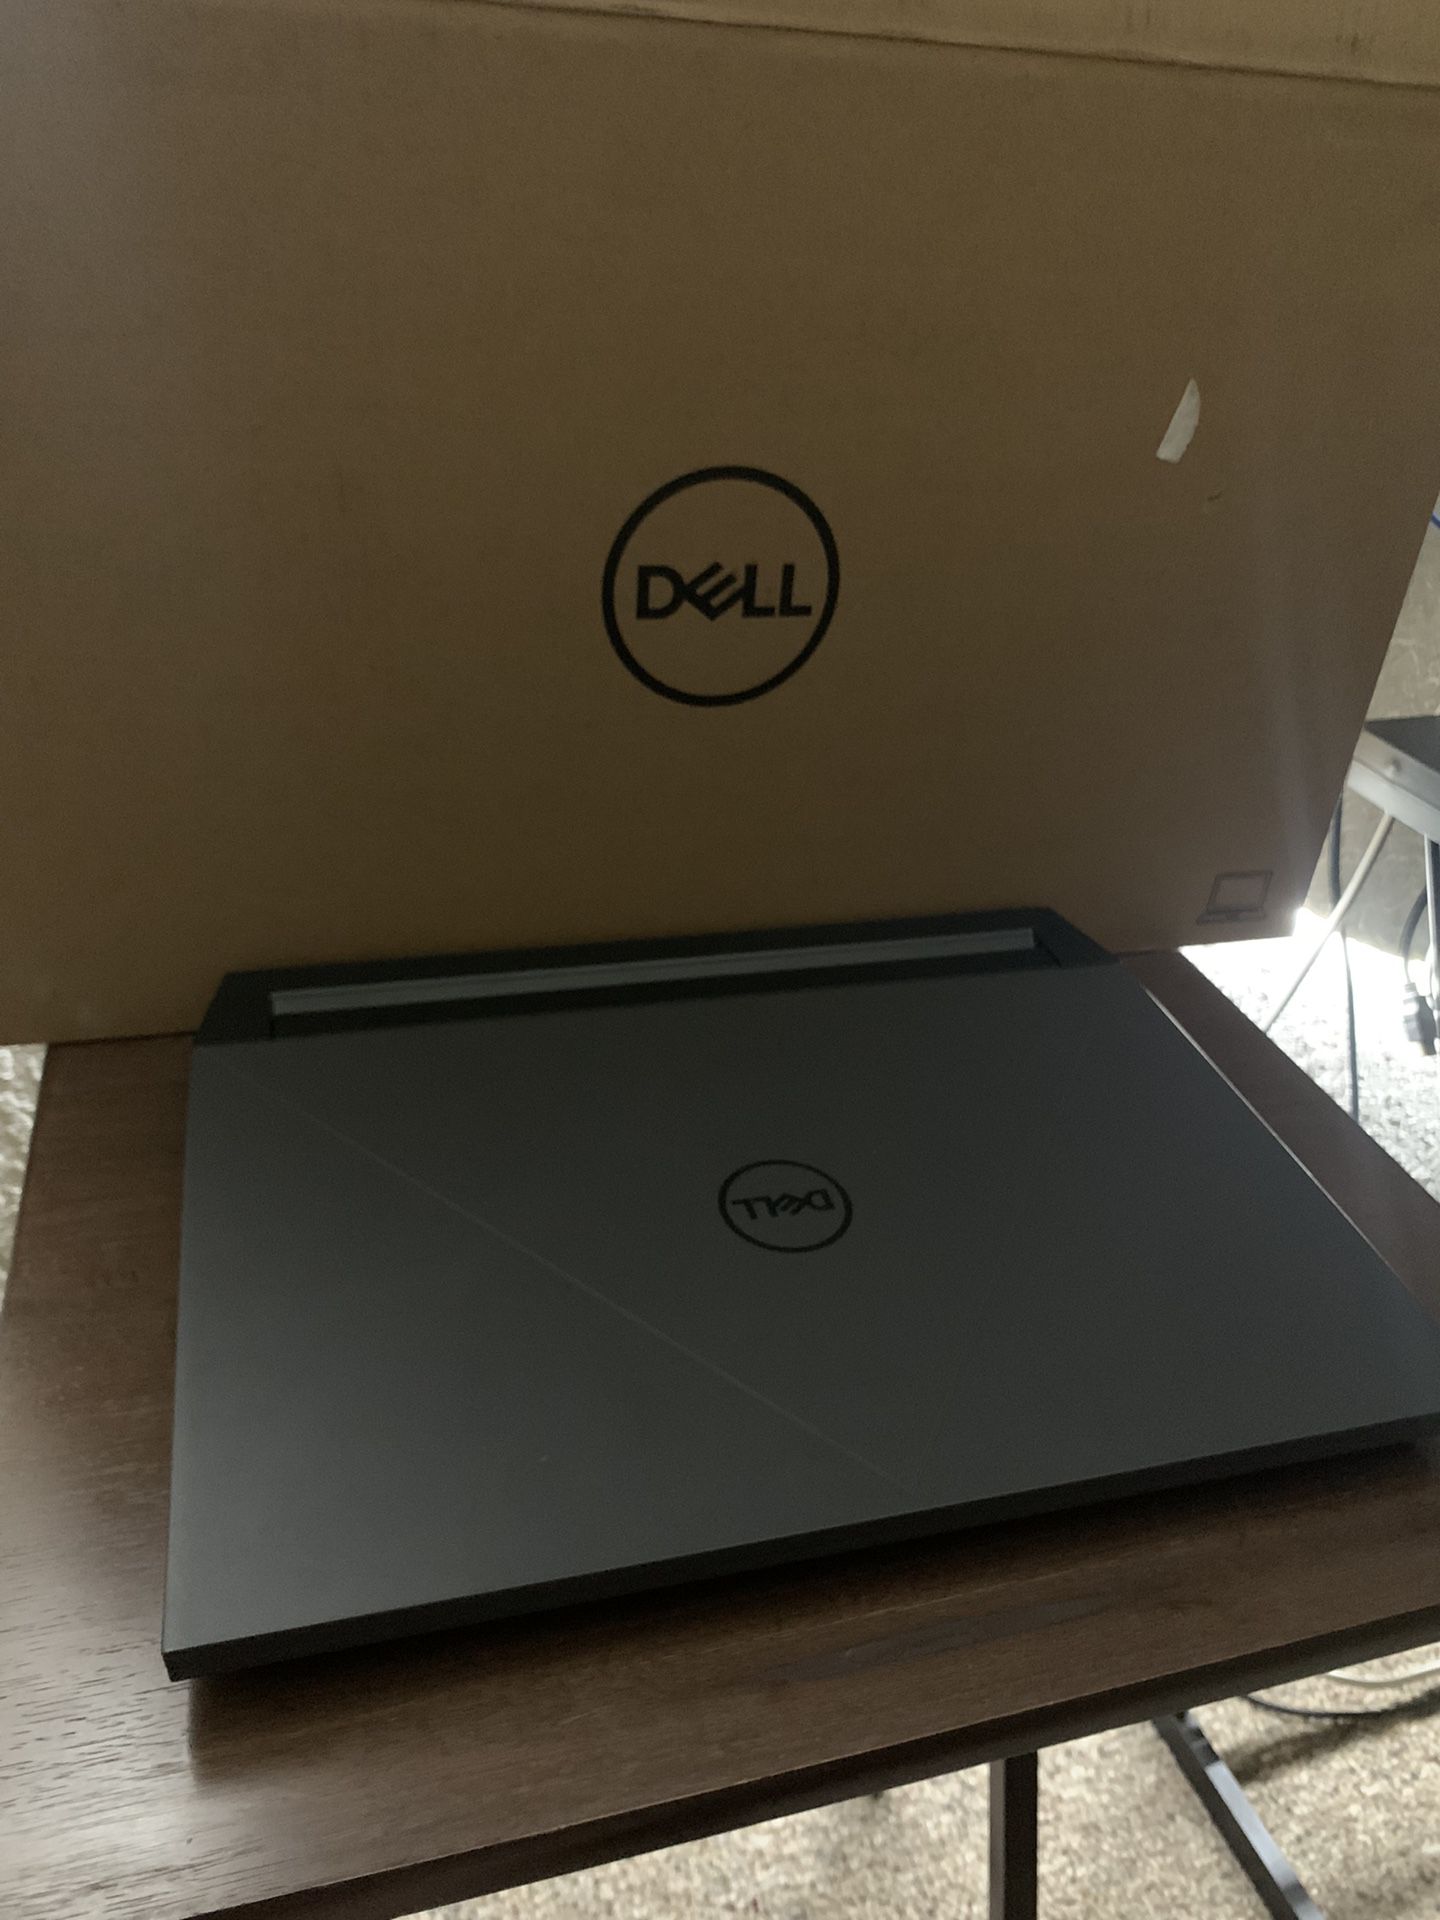 DELL G15 Gaming Laptop